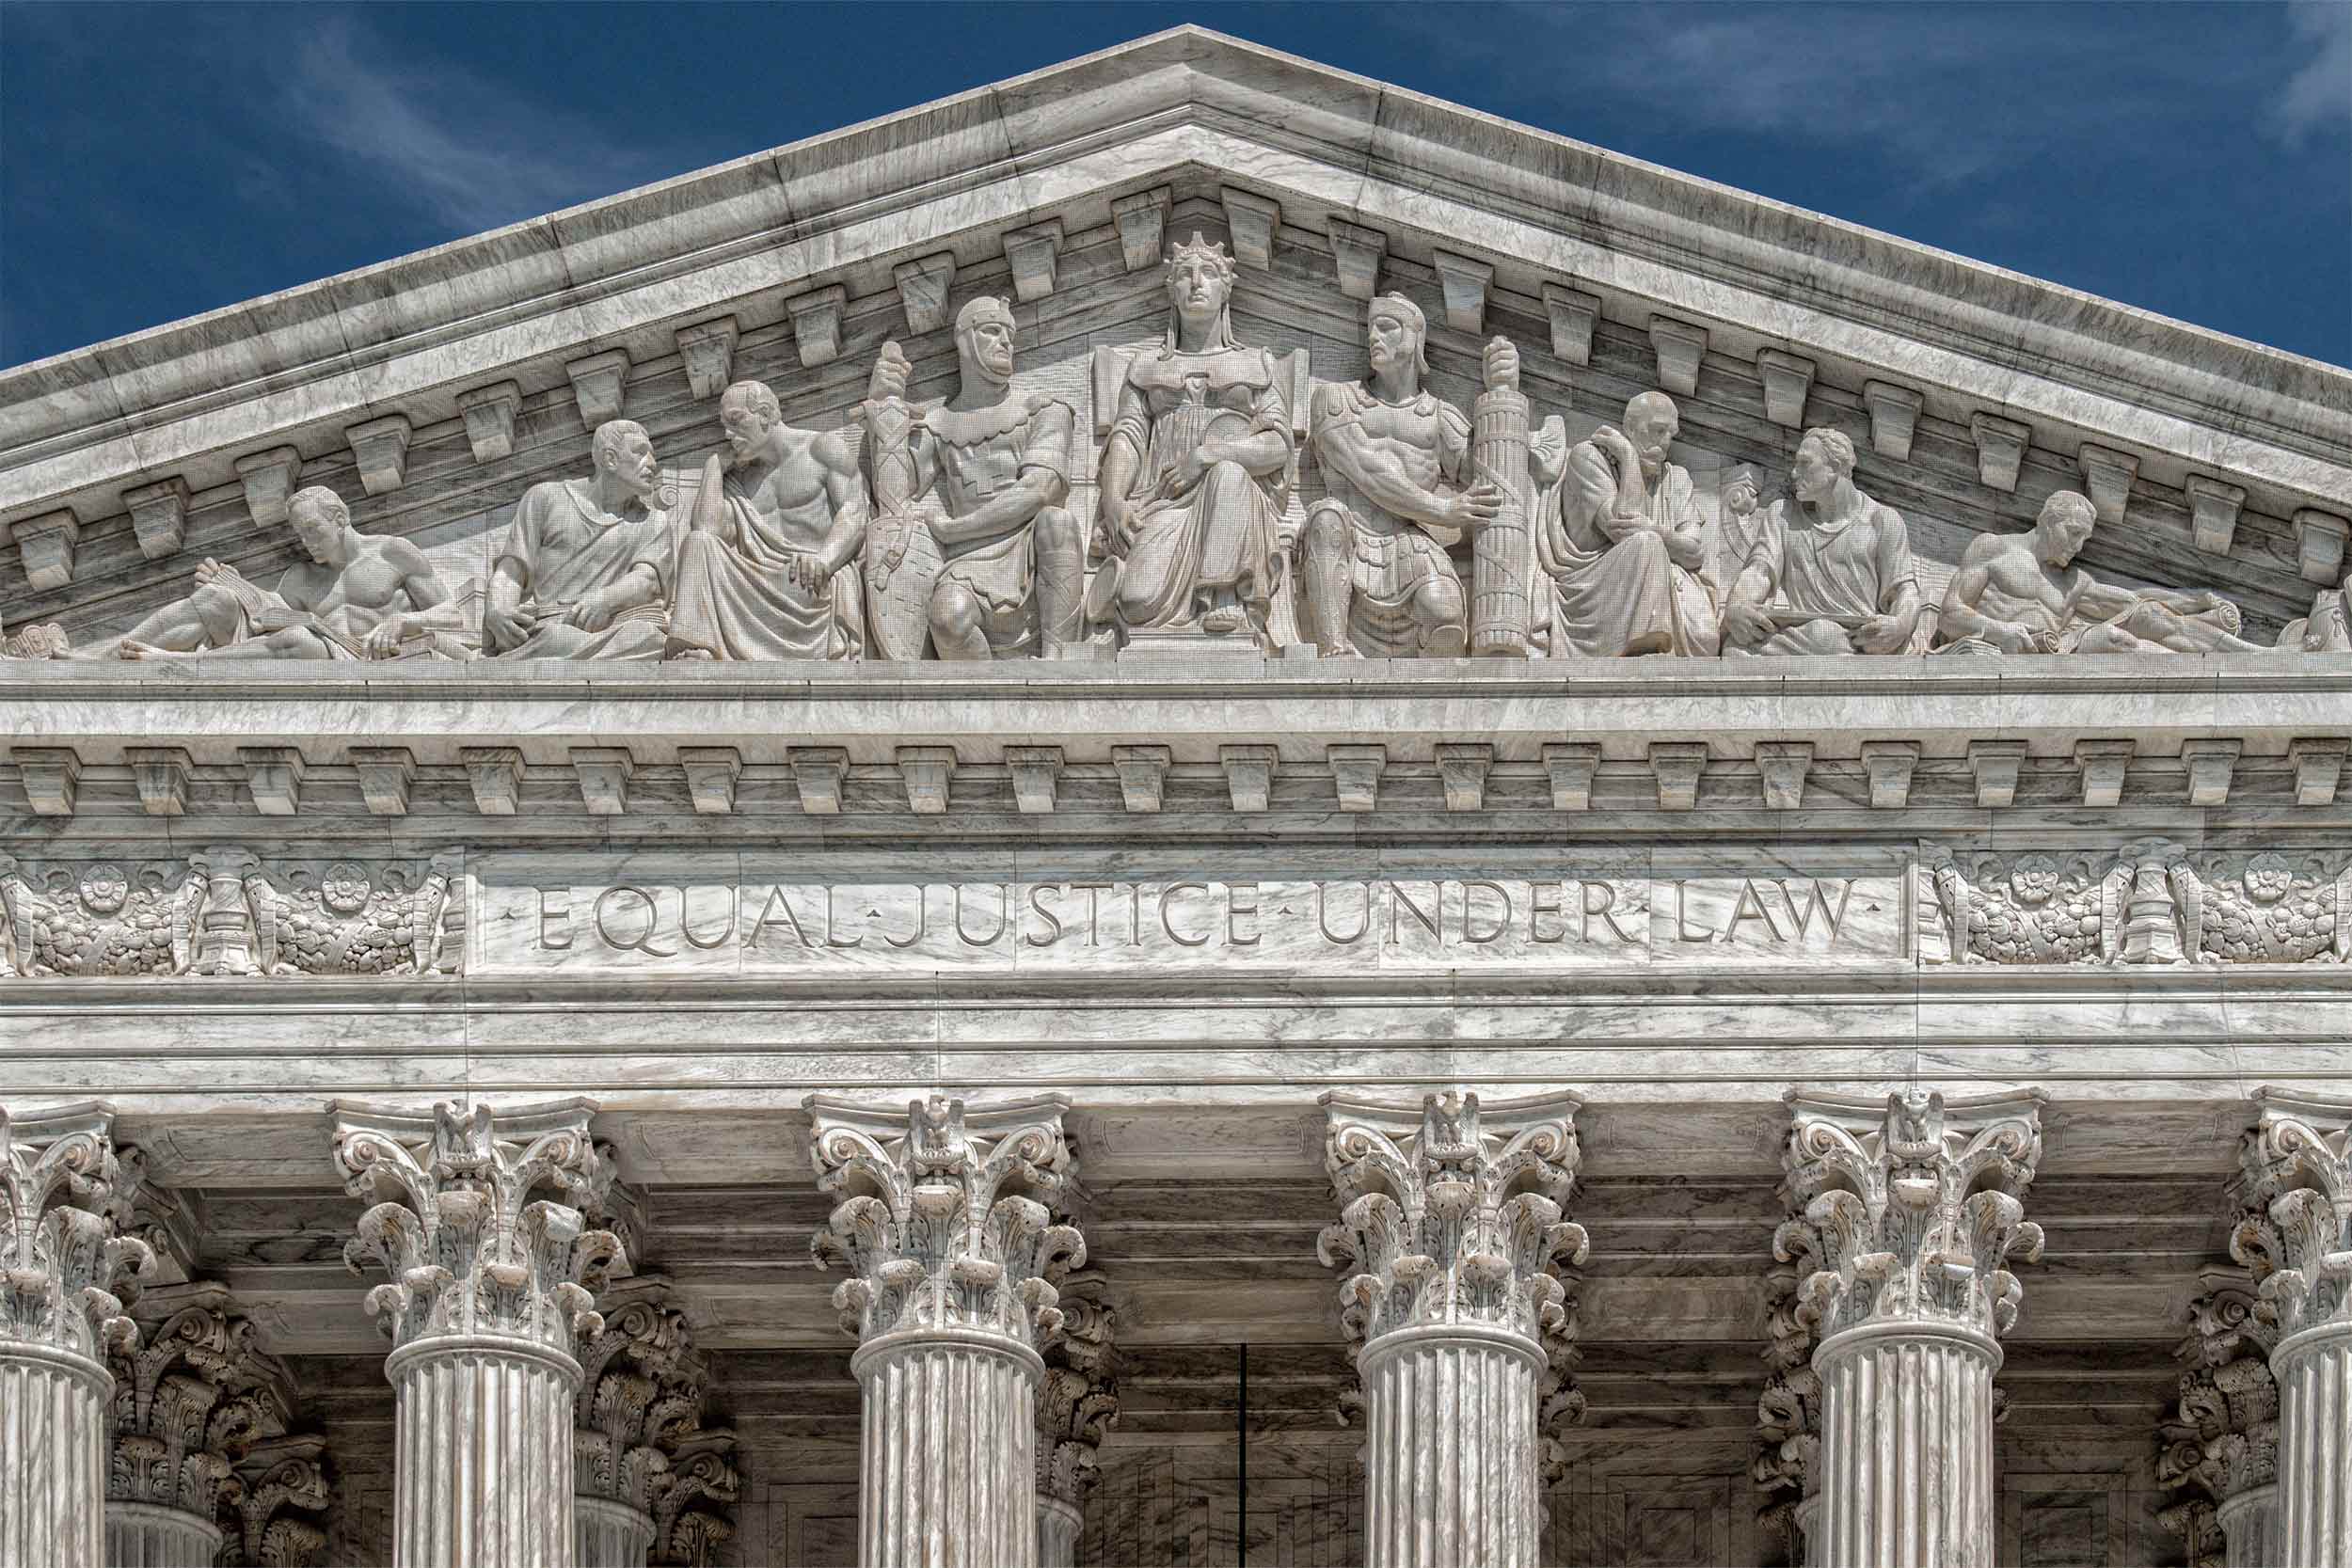 Close up of the Supreme Court